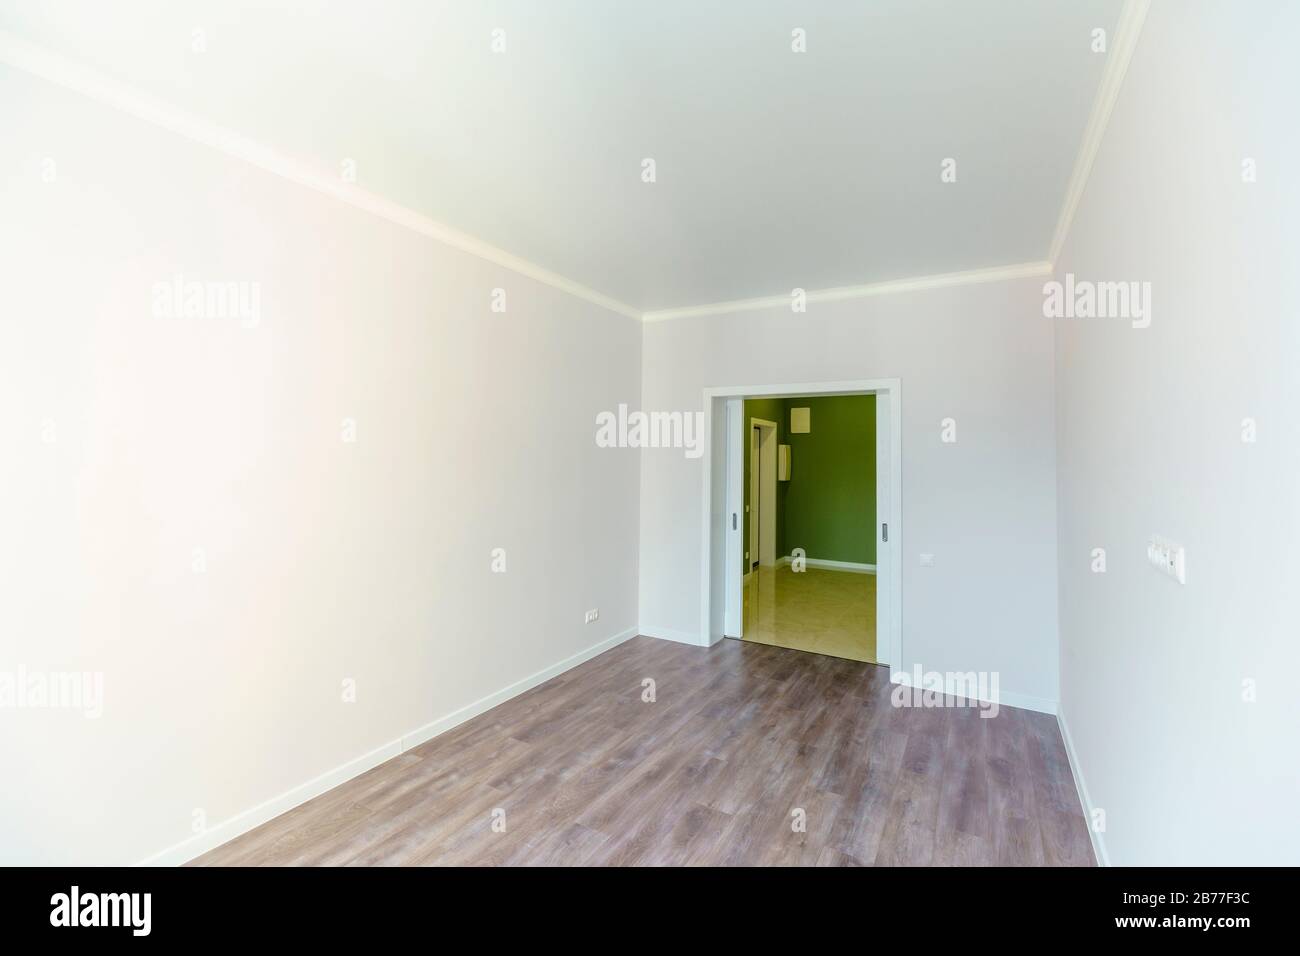 An Empty Room With White Walls And Wooden Floors Fresh New